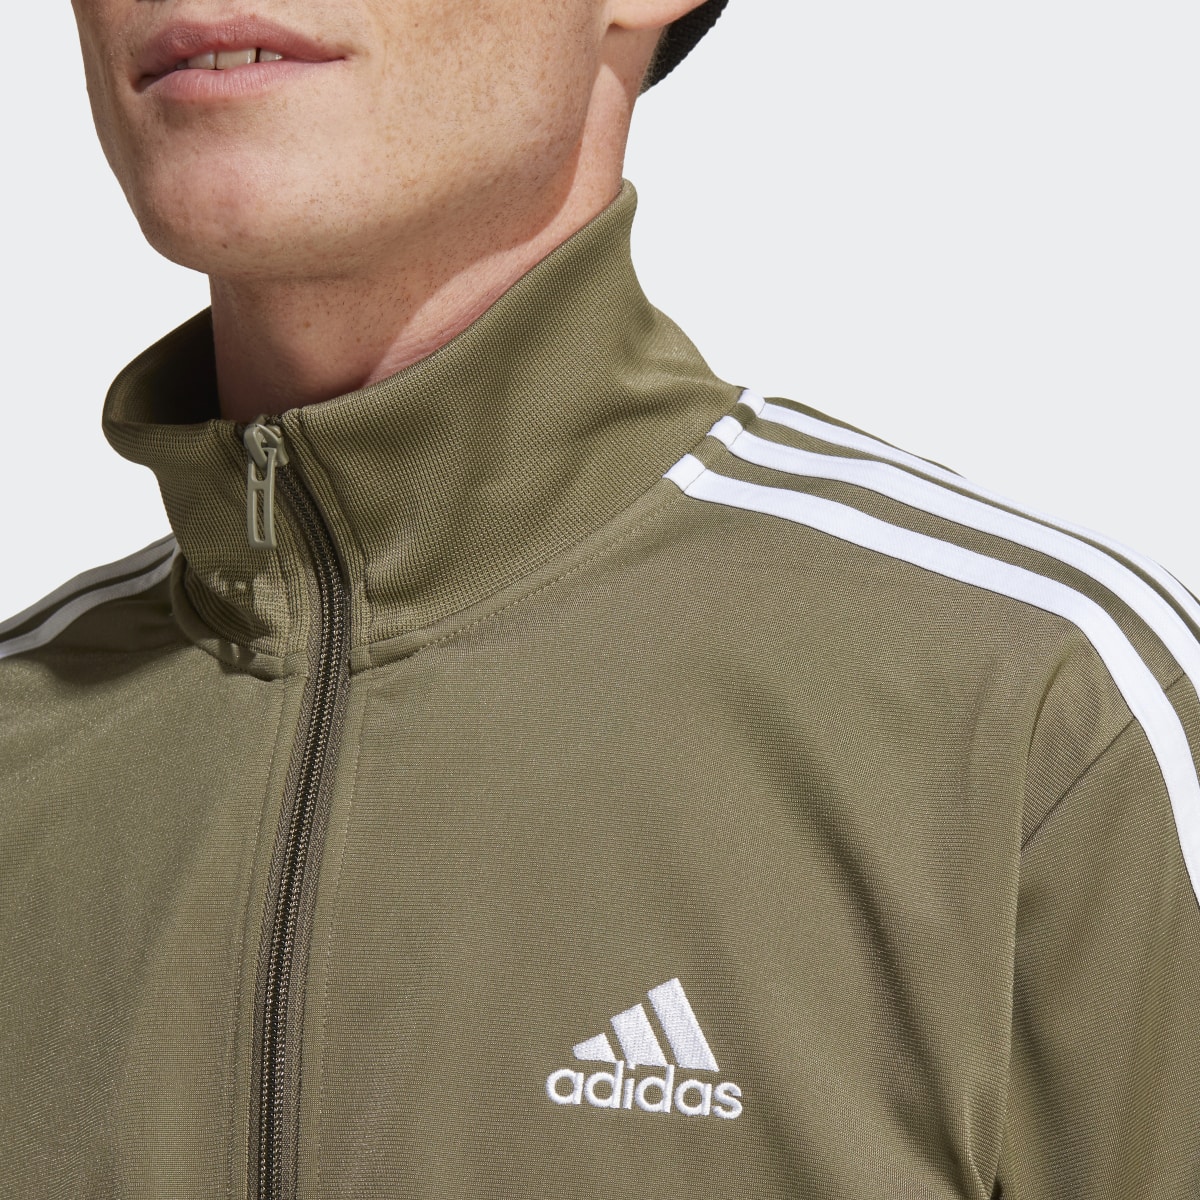 Adidas Basic 3-Stripes Tricot Track Suit. 8